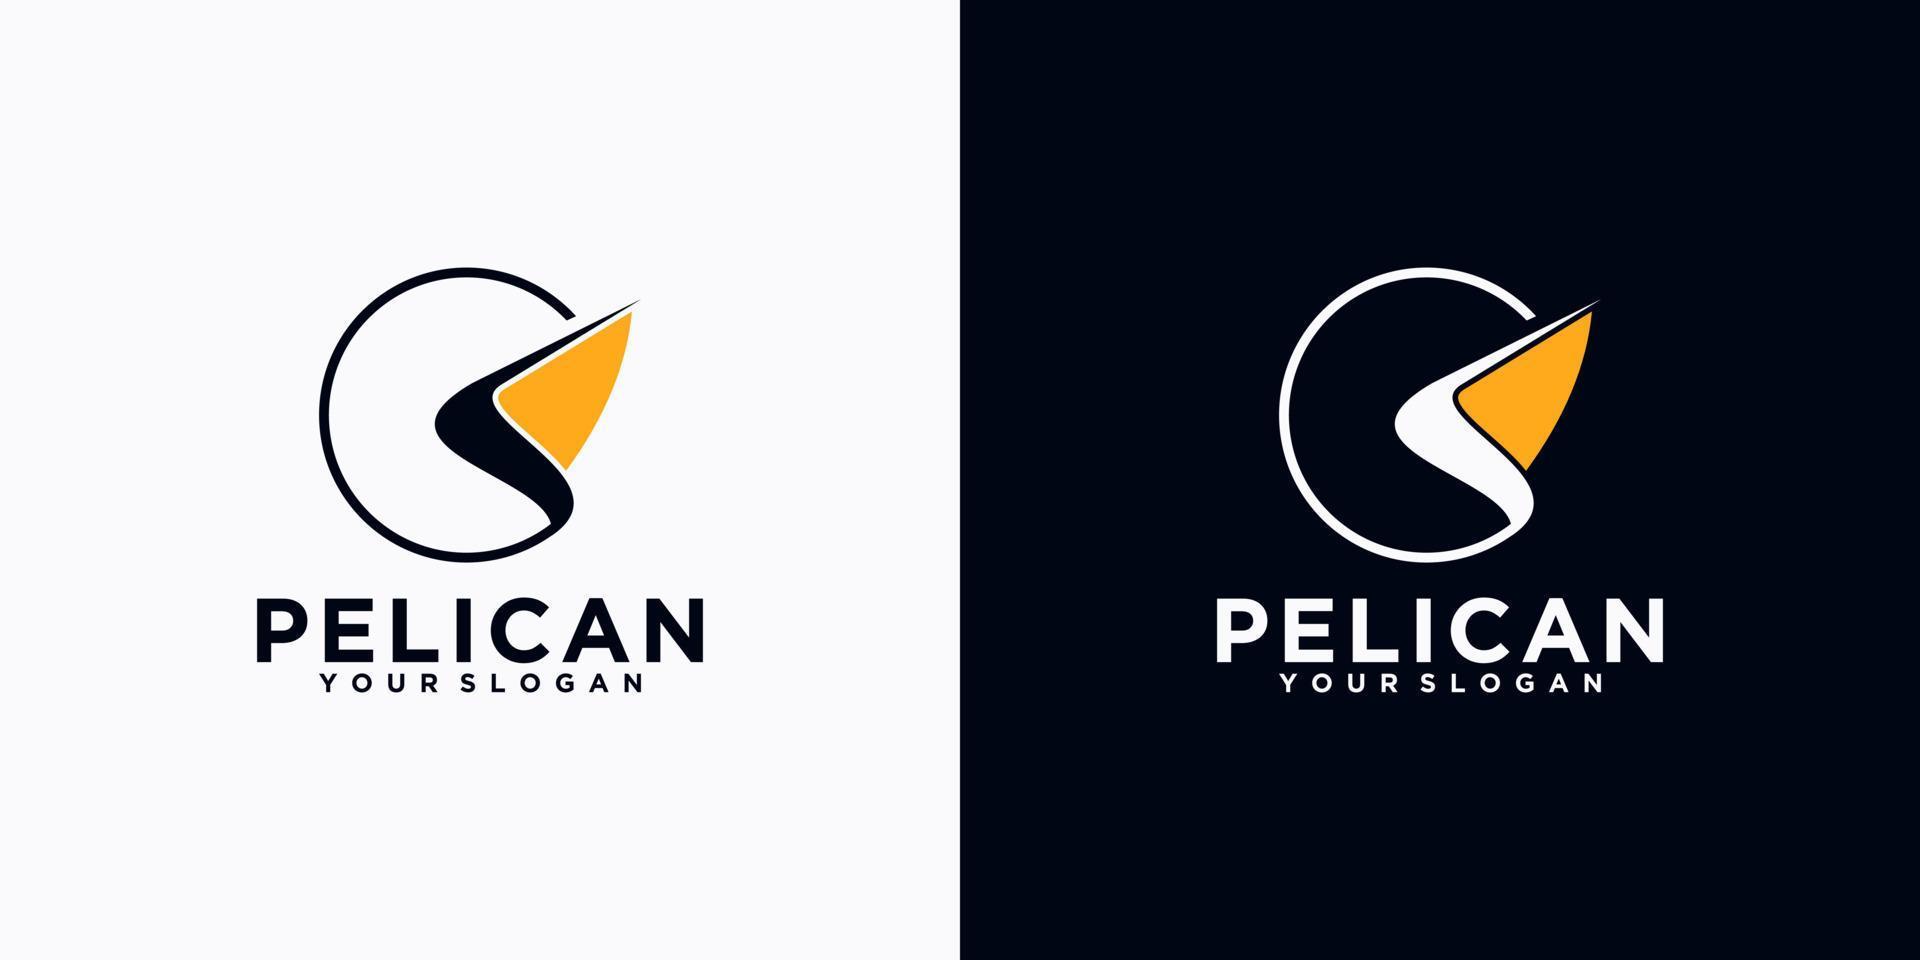 Pelican logo reference for business vector